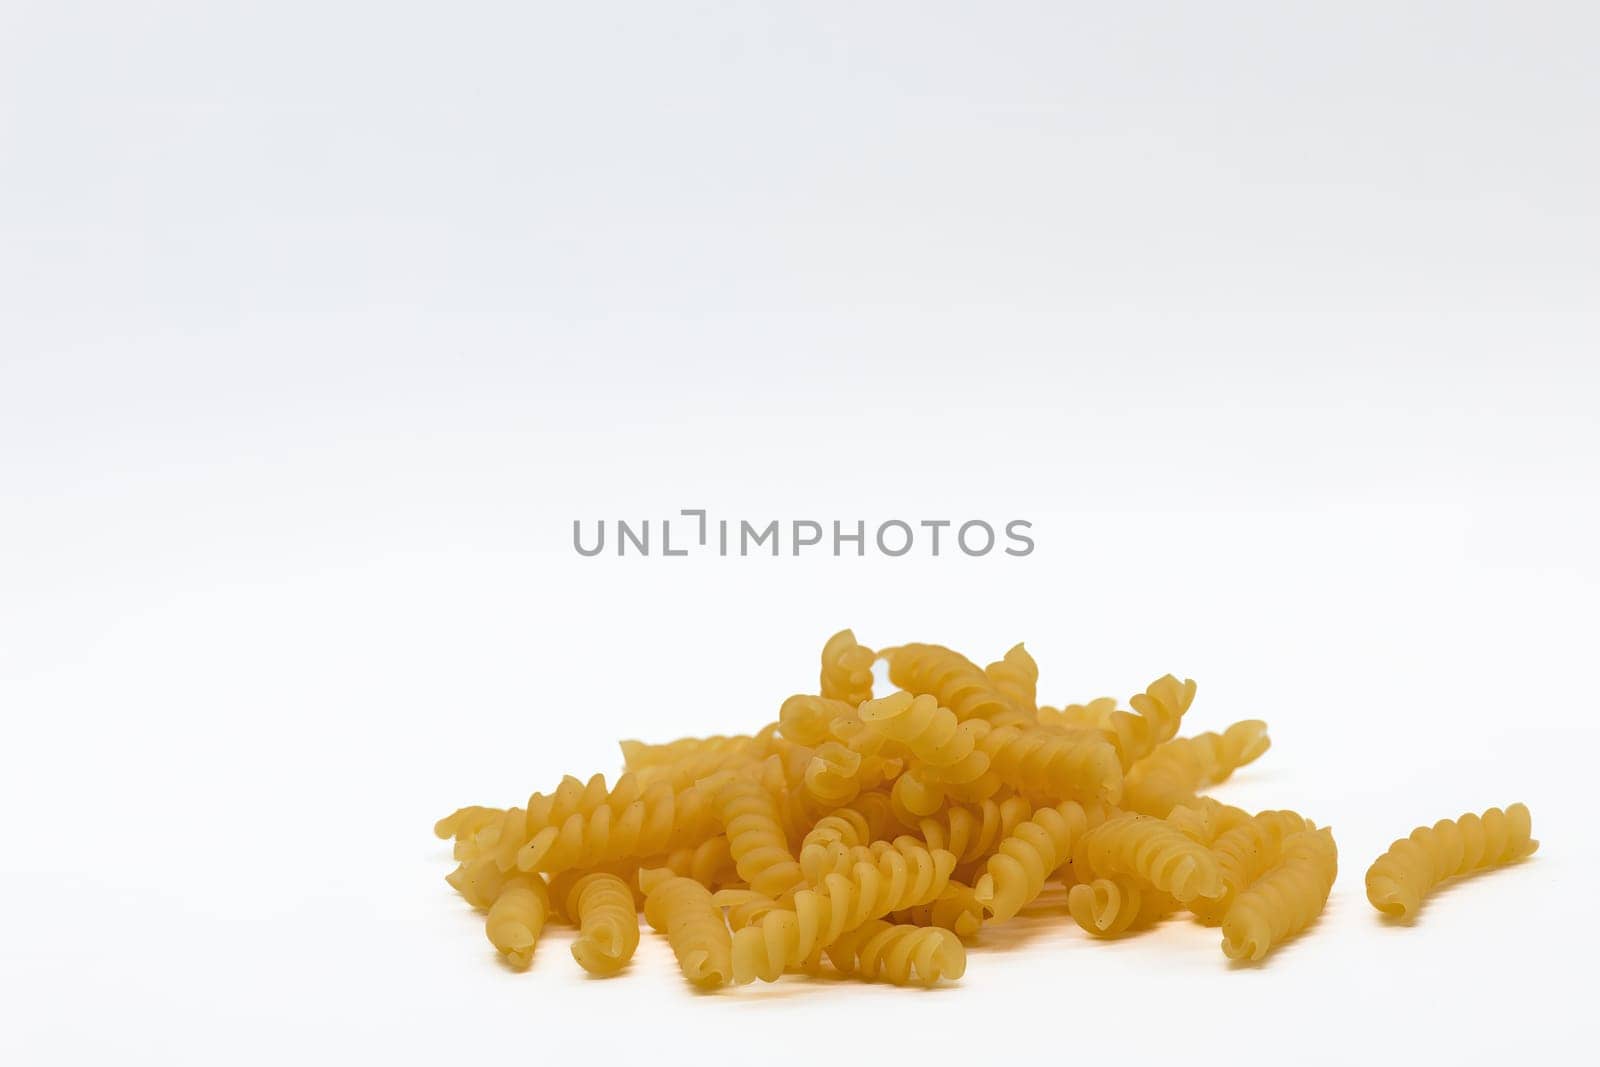 A pile of pasta on a white background by exndiver